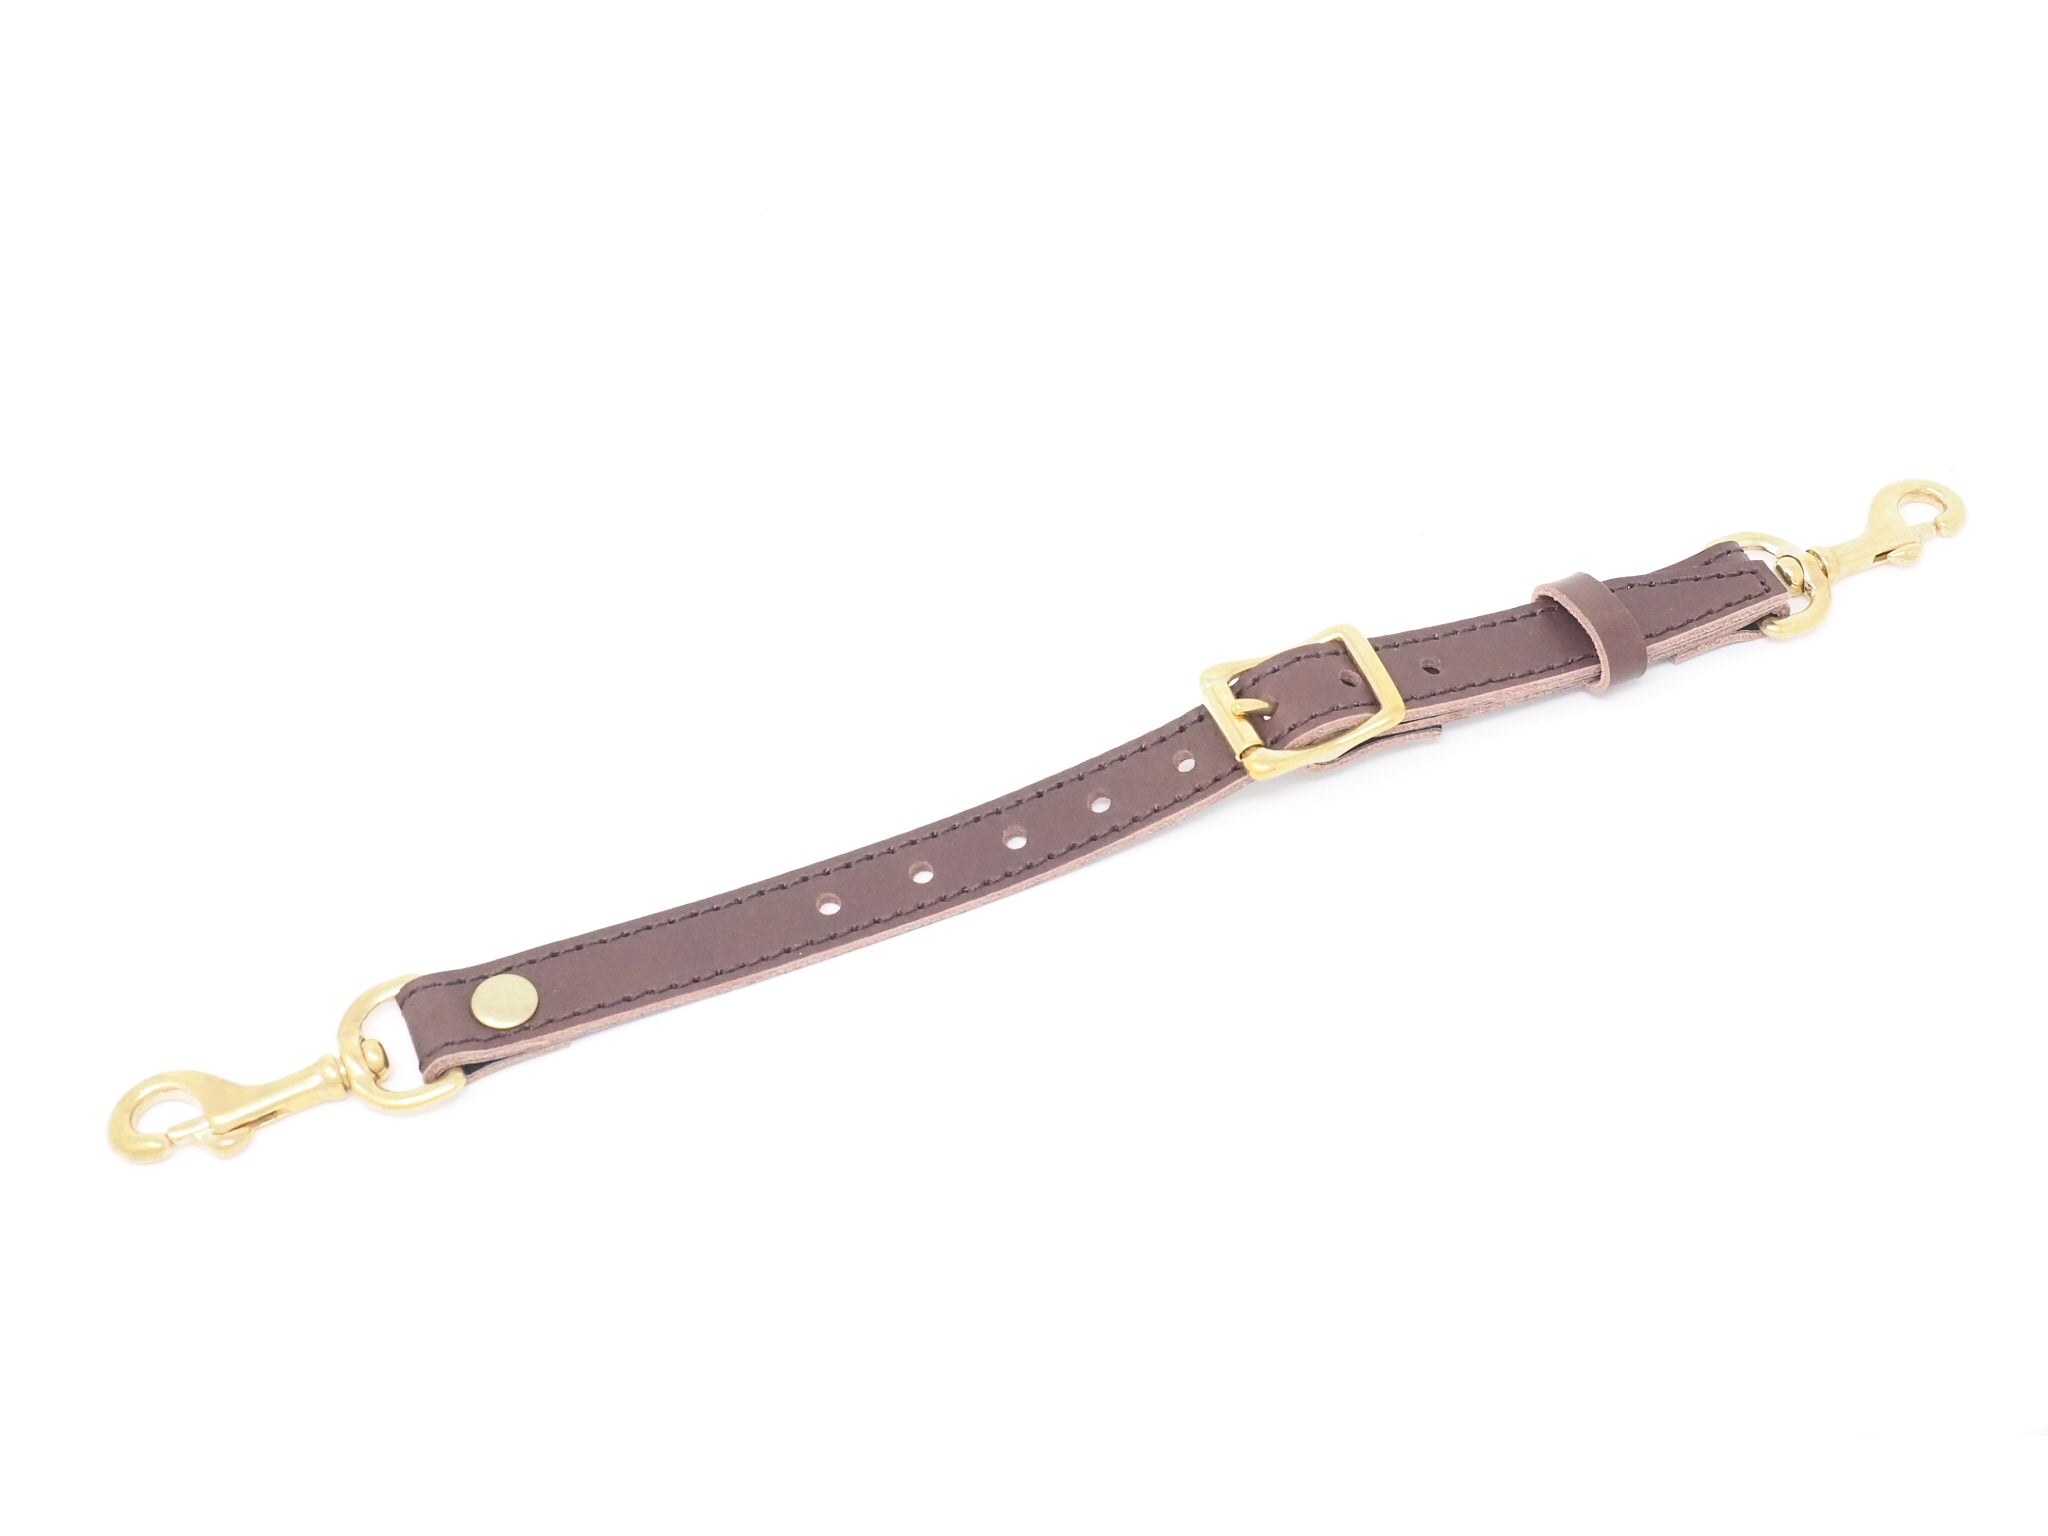 Black Genuine Leather Luggage Strap W/ Brass-Plated Buckle, 3 Holes  2420-1041 and more Leather Straps W/ Brass-Plated Steel Buckle W/ Adjustable  Strap at